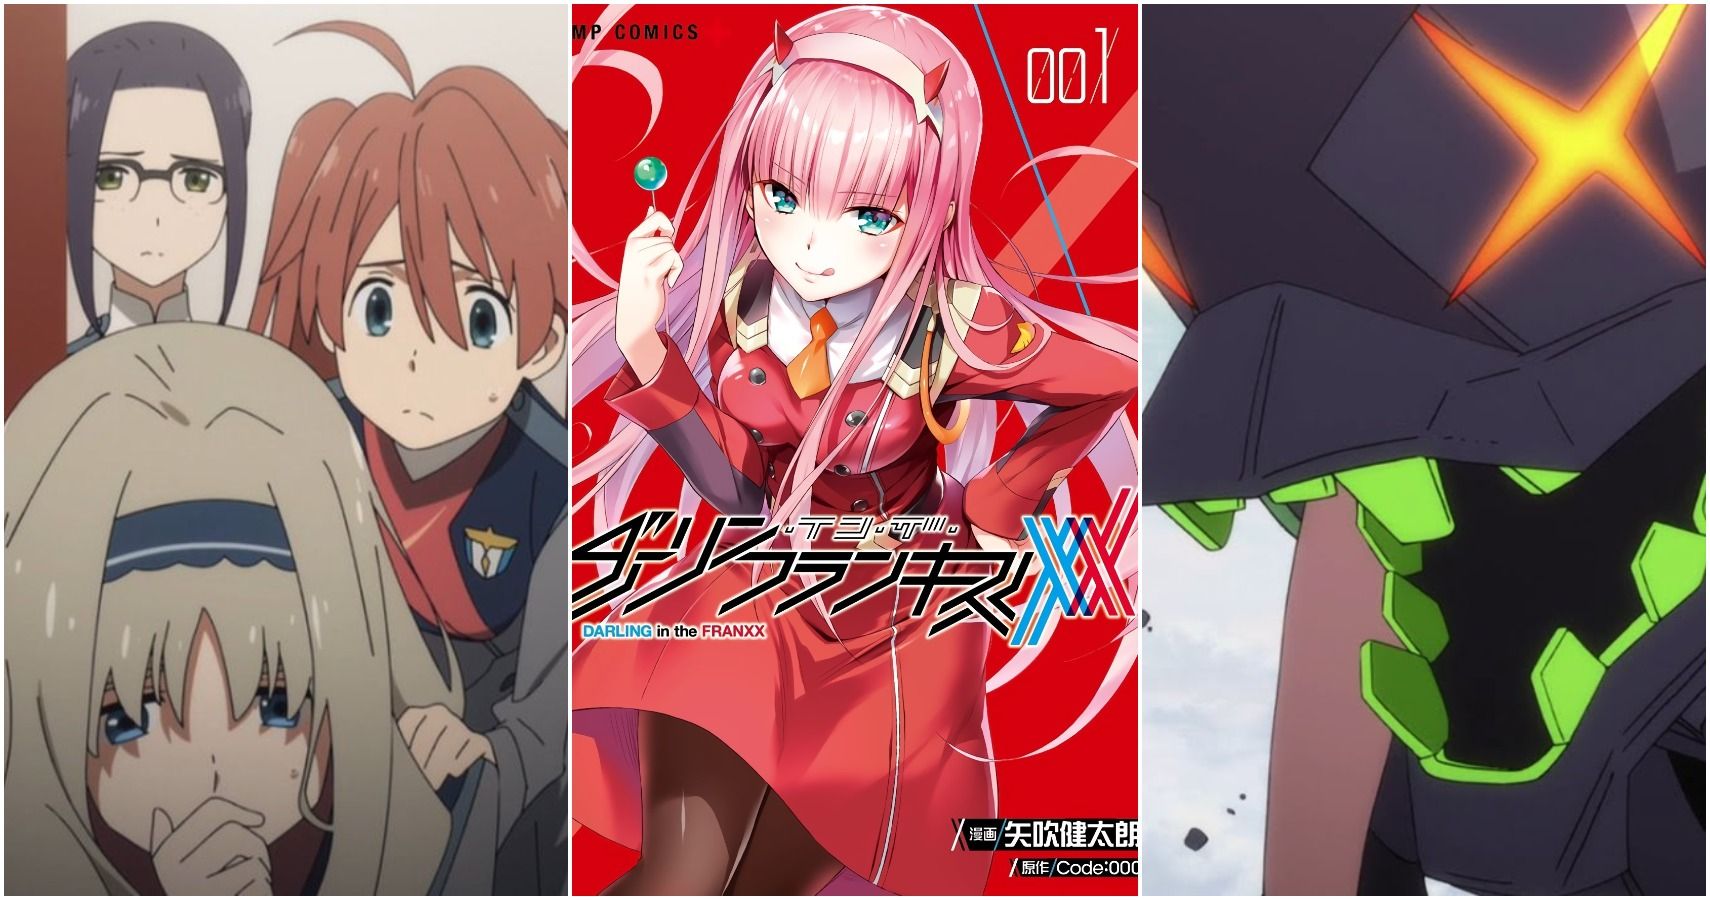 Darling In The Franxx: 5 Reasons Kokoro Should Have Ended Up With